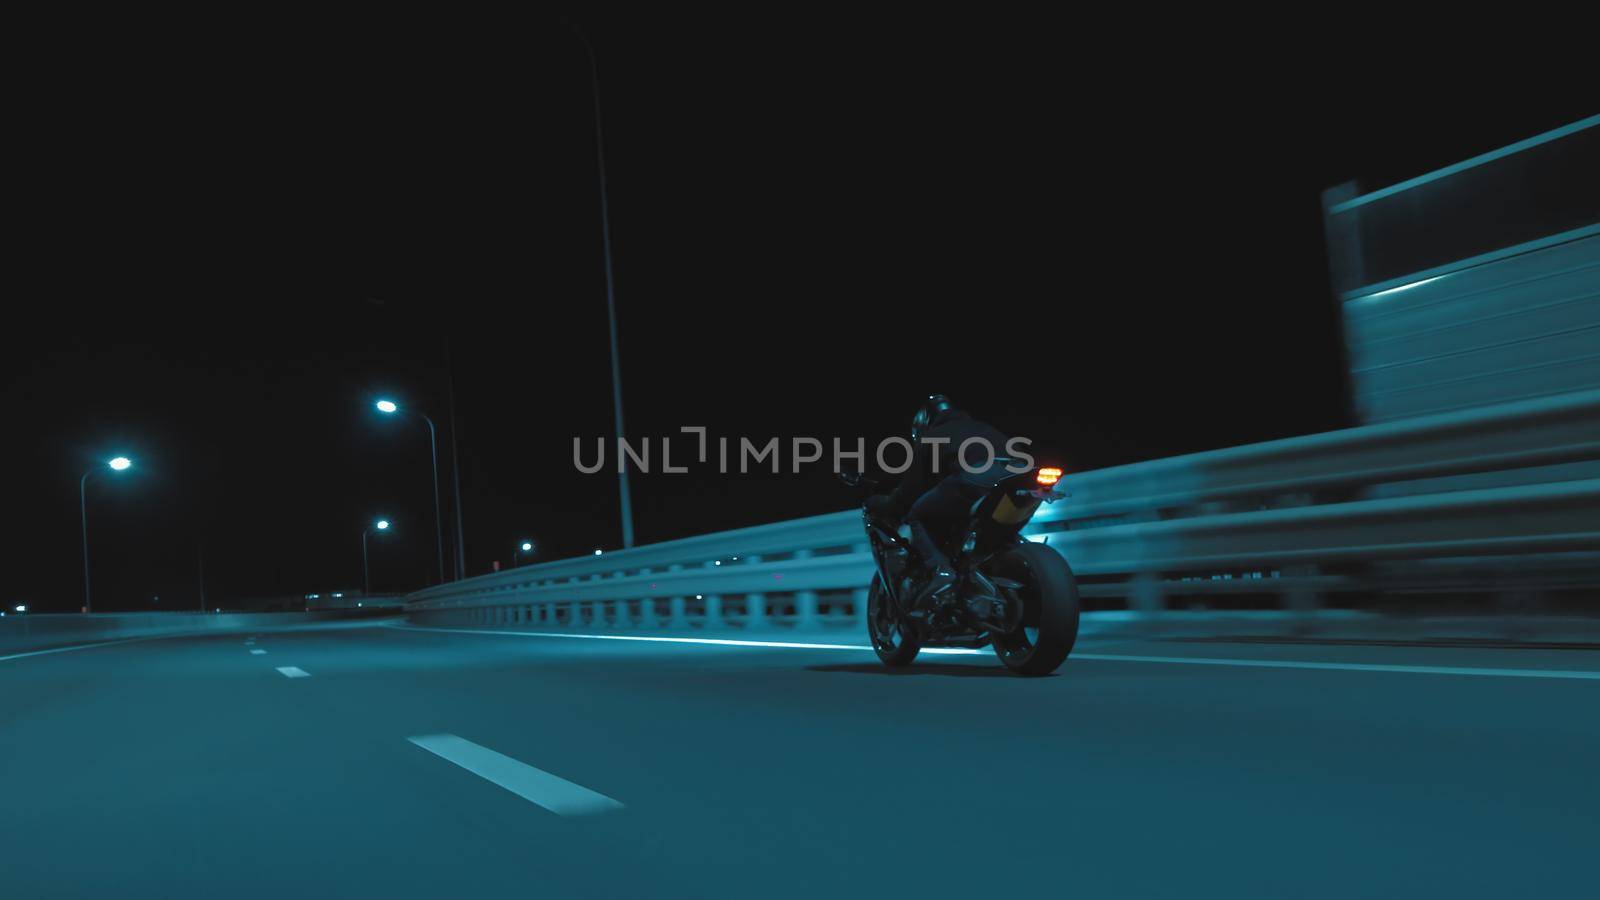 A man rides a sports motorcycle on a night track in 4k